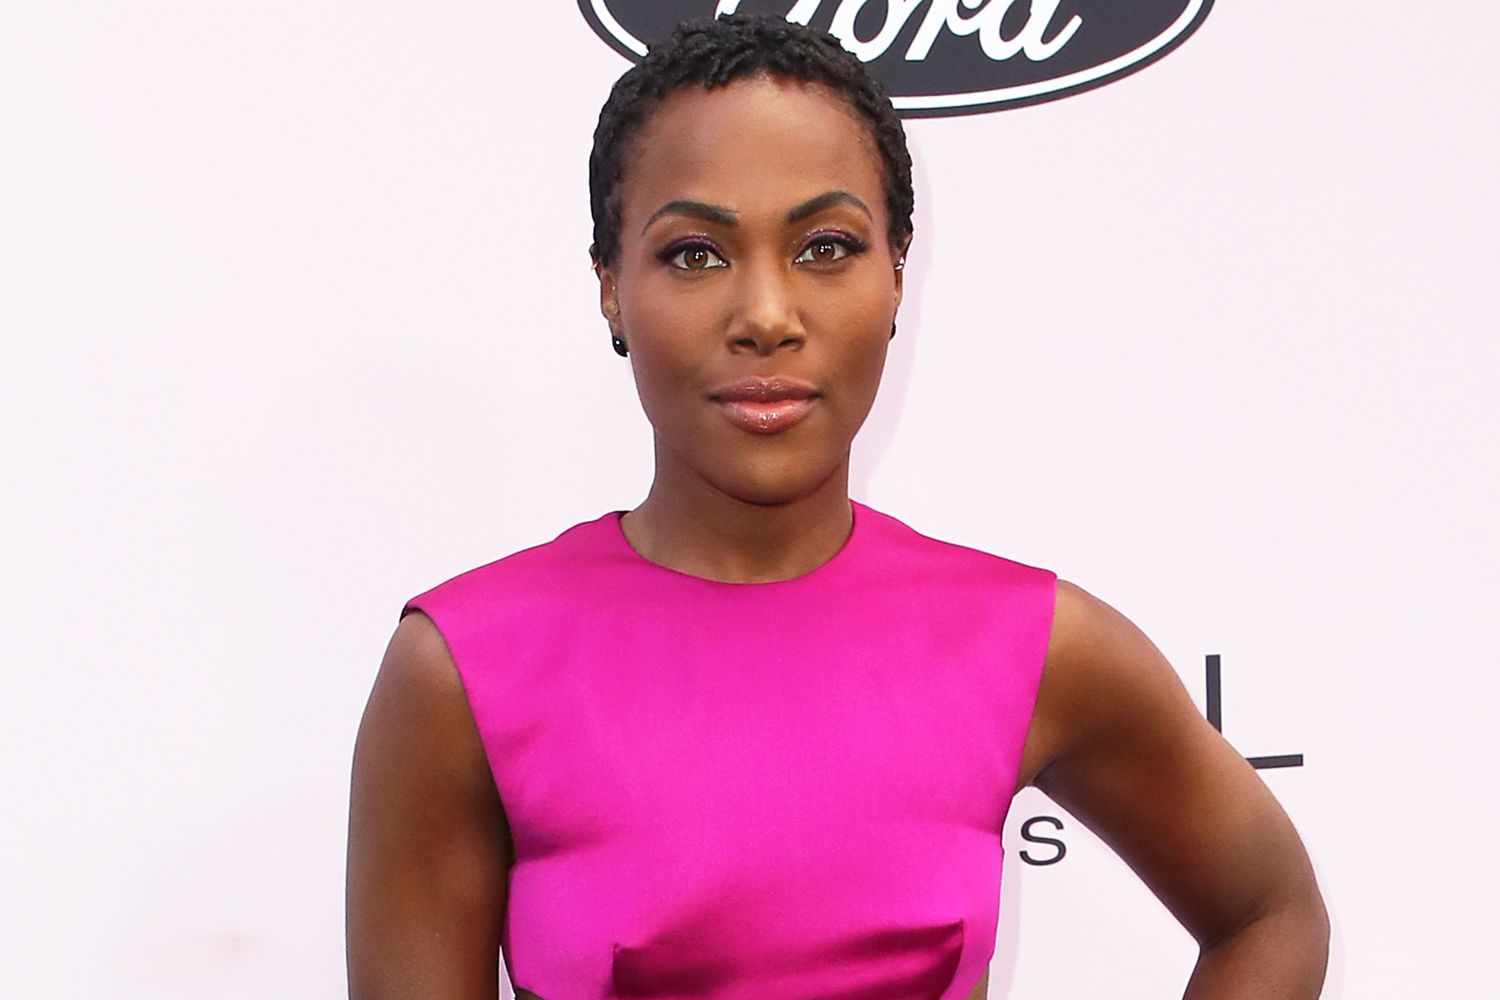 DeWanda Wise attends the 13th Annual Essence Black Women In Hollywood Awards Luncheon at the Beverly Wilshire Four Seasons Hotel on February 06, 2020 in Beverly Hills, California.